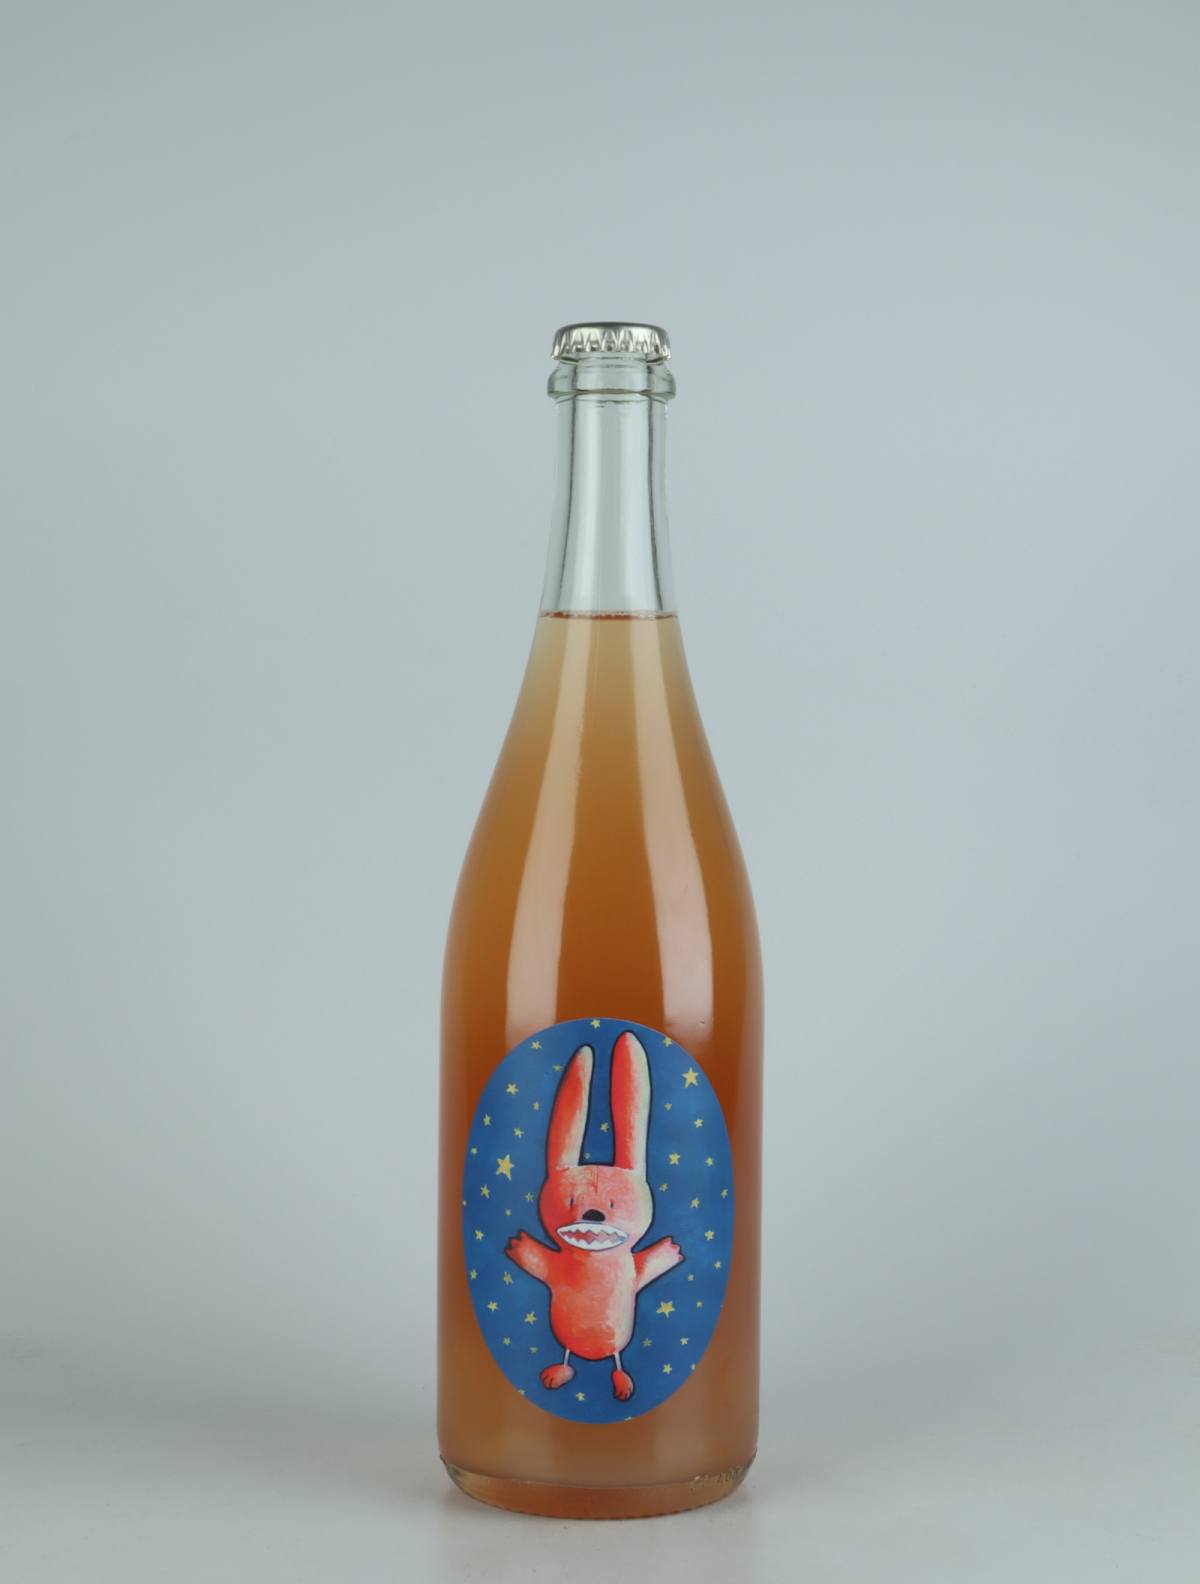 A bottle 2021 Astro Bunny Sparkling from Wildman, Adelaide Hills in 